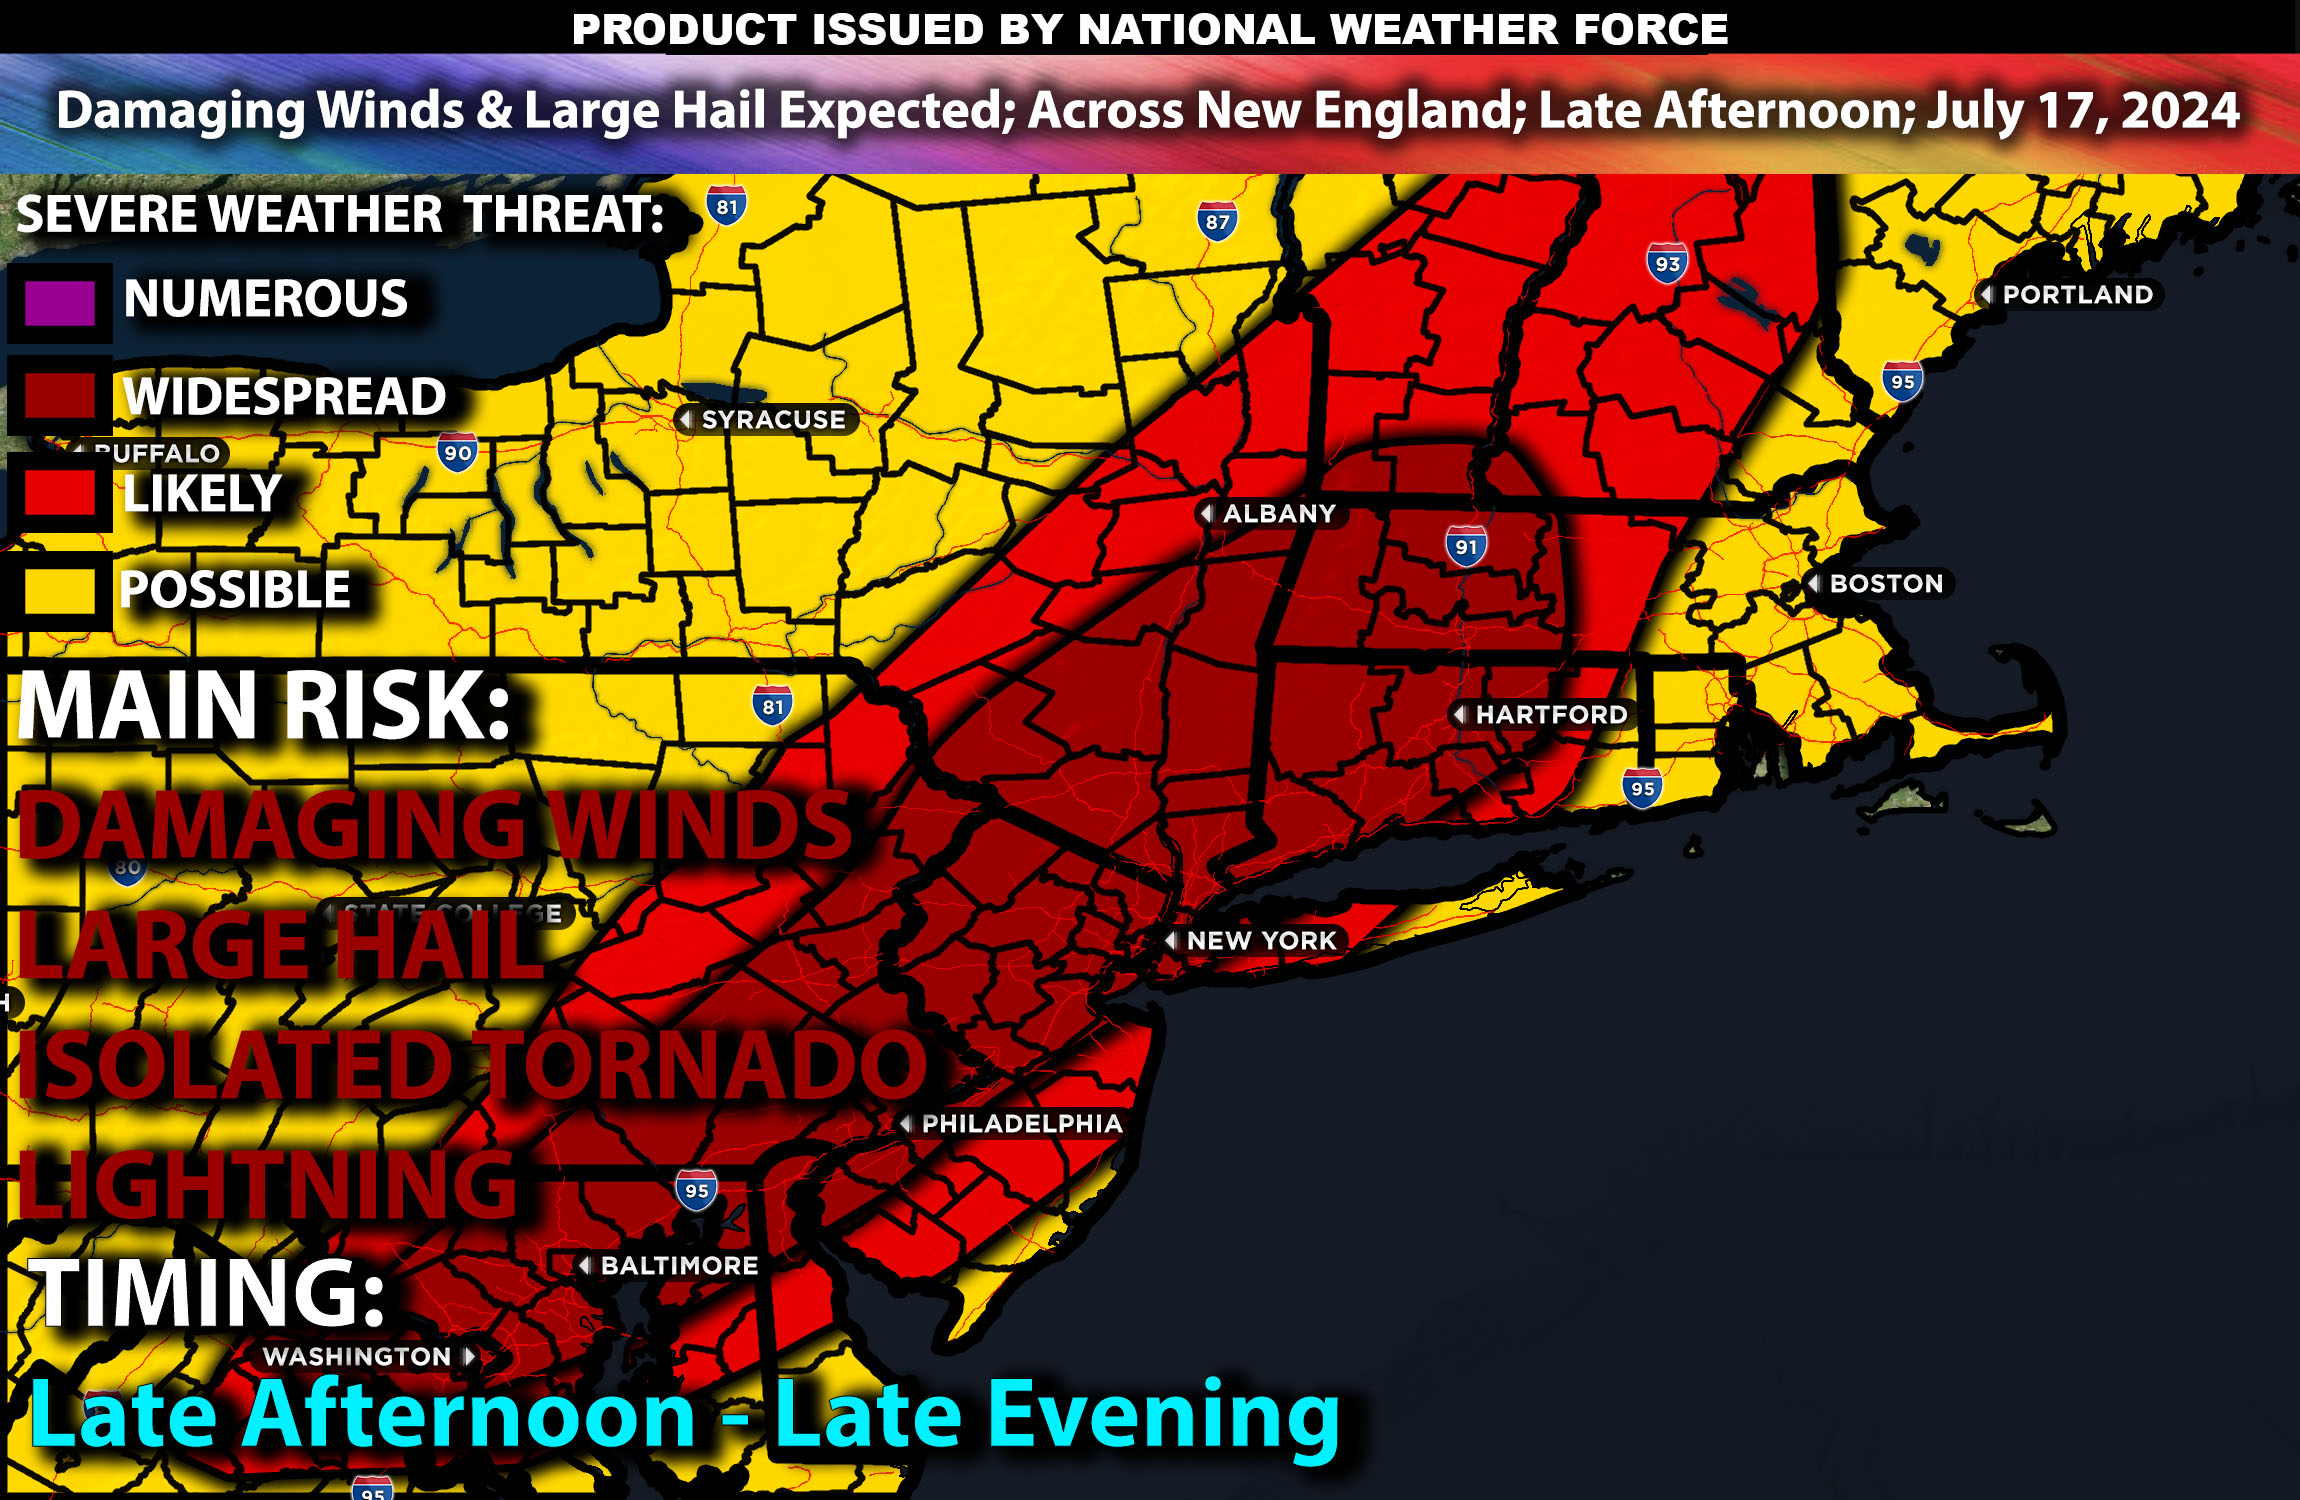 Damaging Winds & Large Hail Expected; Across New England; Late Afternoon – Evening; July 17, 2024